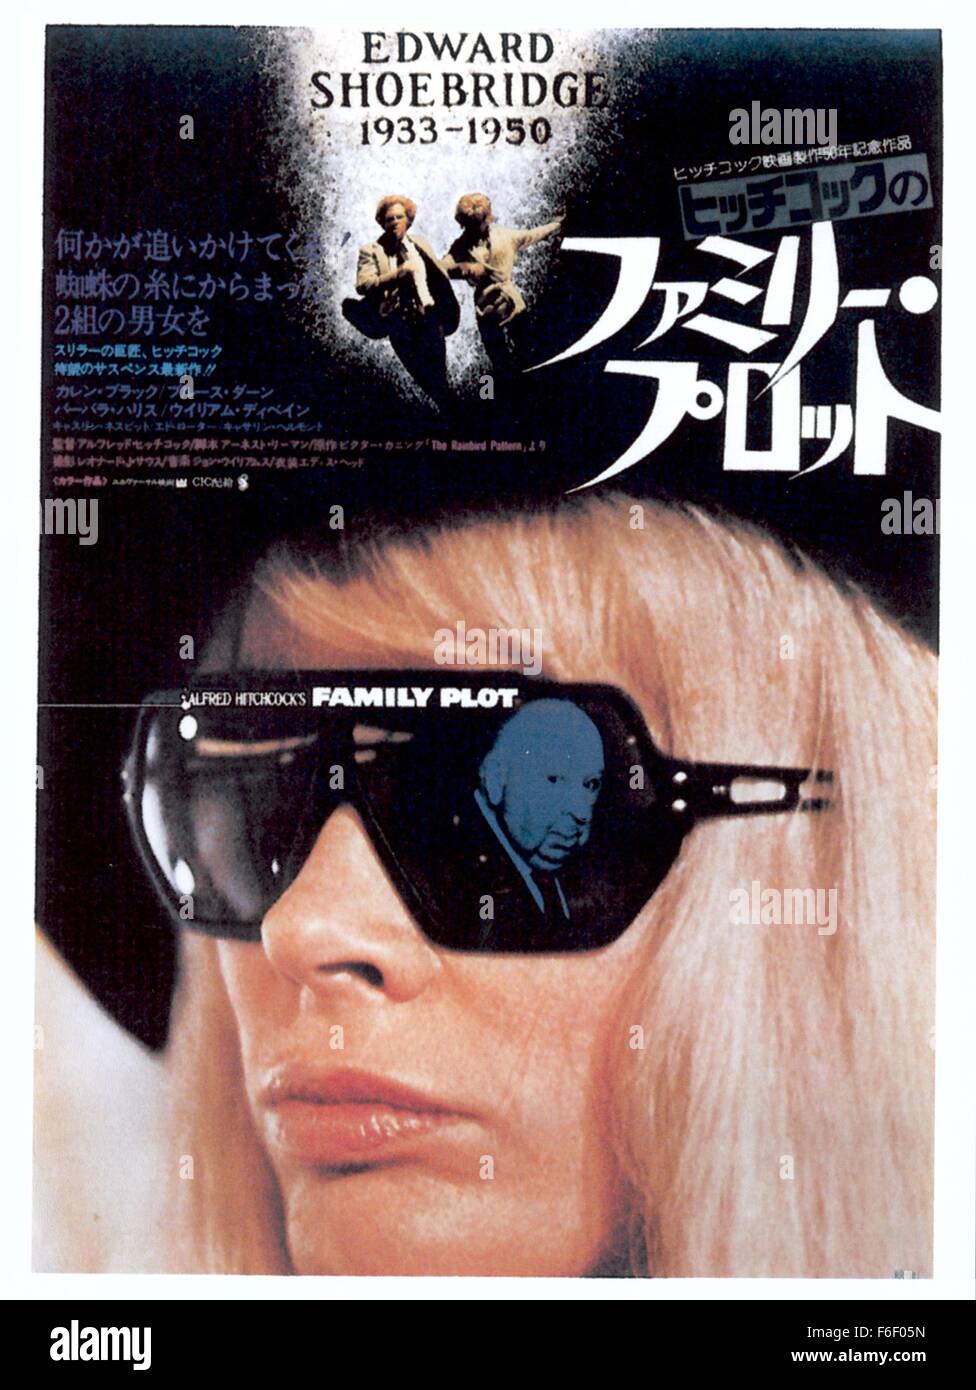 RELEASE DATE: April 9, 1976. MOVIE TITLE: Family Plot. STUDIO: Universal Pictures. PLOT: Fake medium Madam Blanche and her taxi driver boyfriend George make a living by scamming people with her phony powers. They are hired by an aging widow, Julia Rainbird, to find her nephew who was given away for adoption many years earlier following a family scandal. Meanwhile, an extremely clever couple, diamond merchant Arthur Adamson and his attractive girlfriend Fran, are behind a series of kidnappings of various VIPs in the San Francisco area. The two couples paths soon cross and chaos results in Hitch Stock Photo